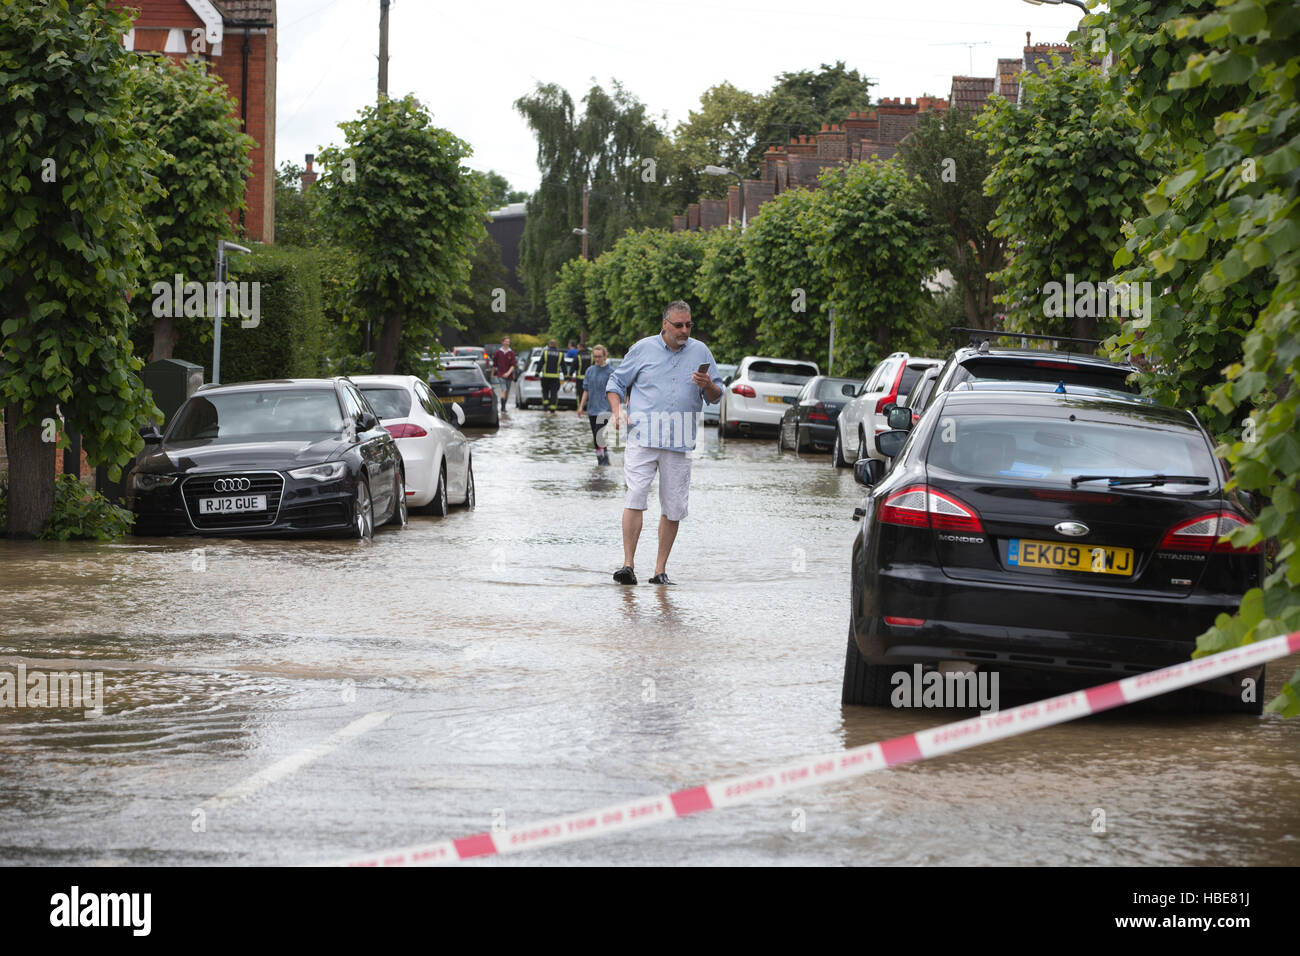 Broken water main pipe causes widespread floods in South Wimbledon, London, England, United Kingdom Stock Photo